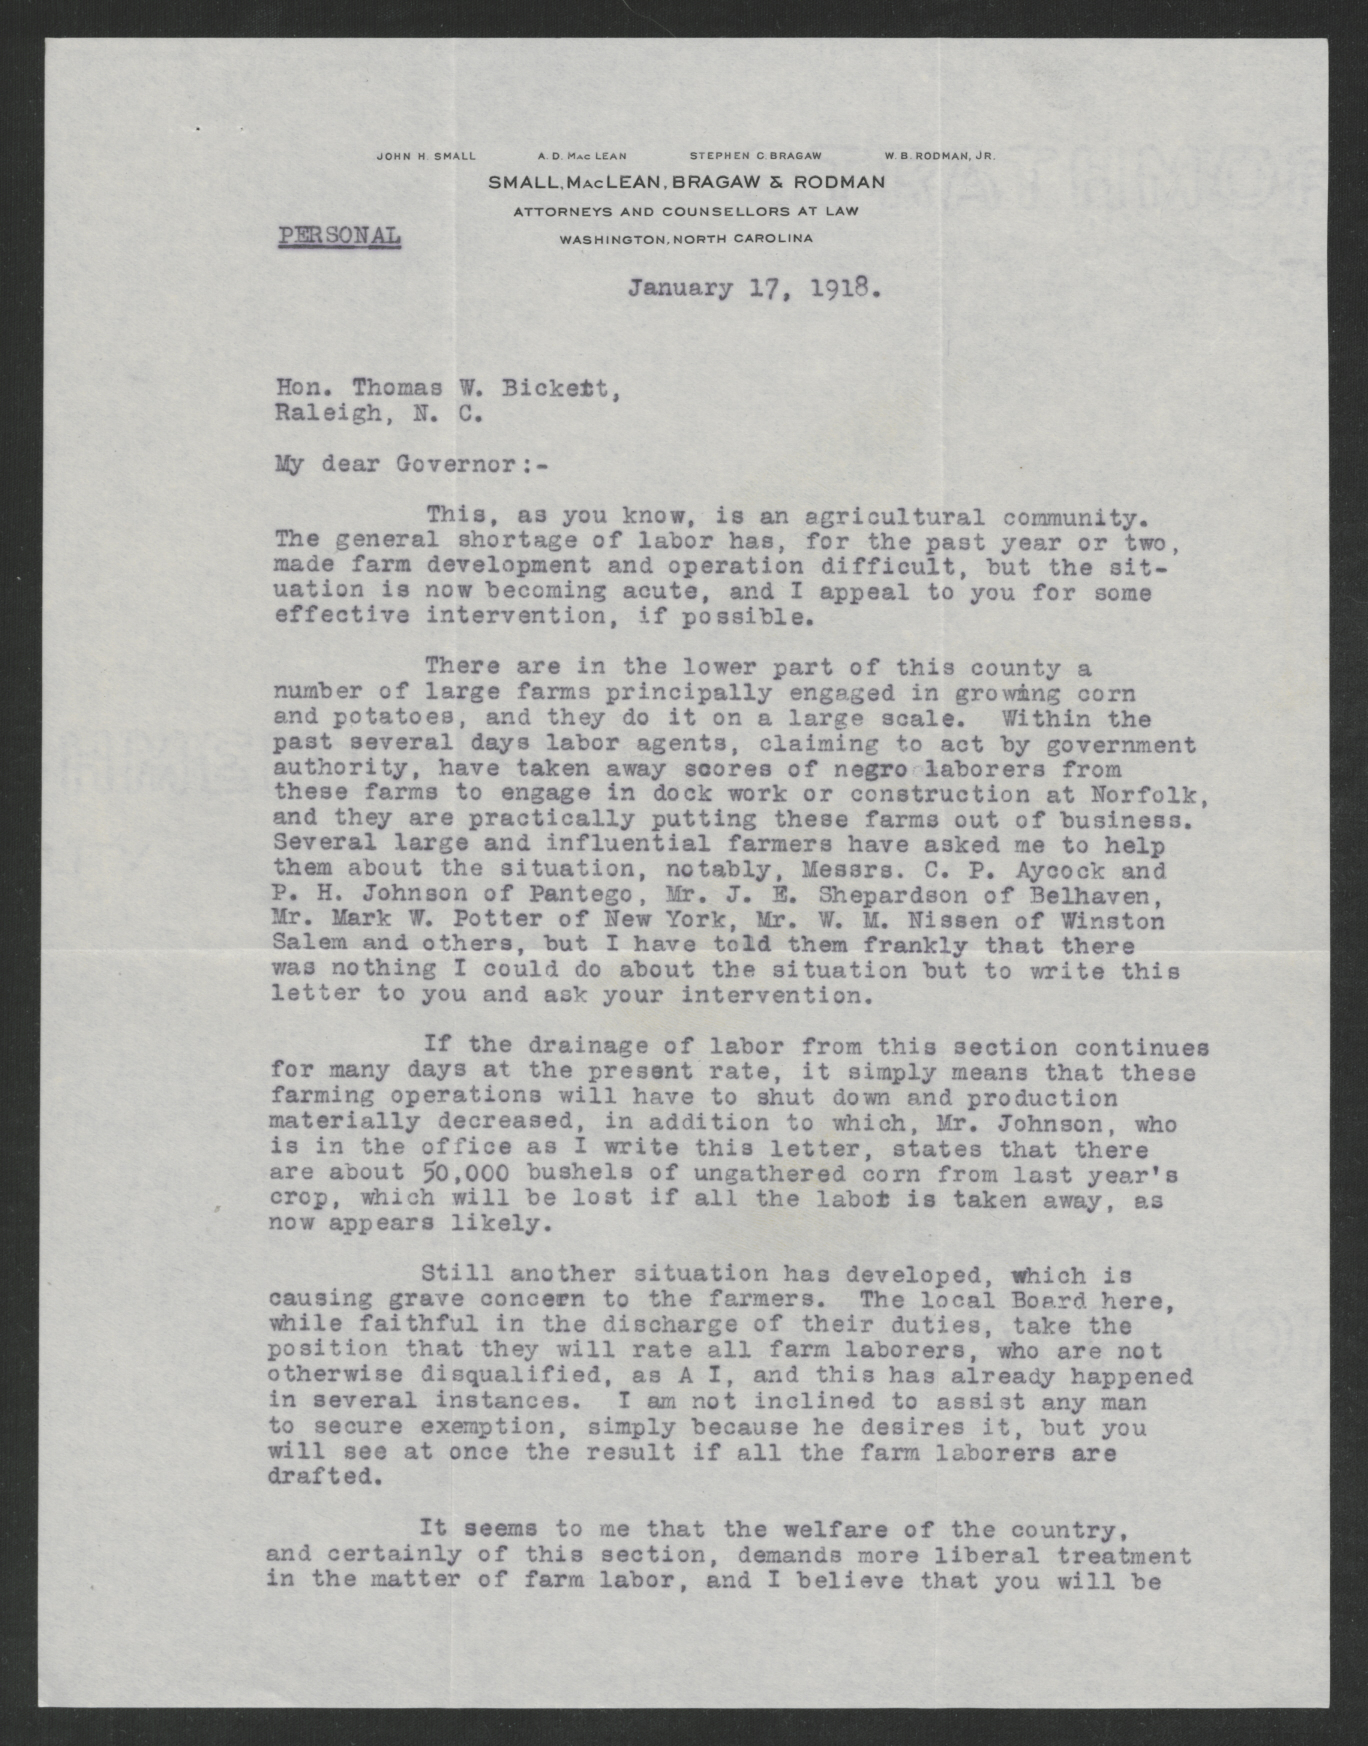 Letter from Angus D. MacLean to Thomas W. Bickett, January 17, 1918, page 1